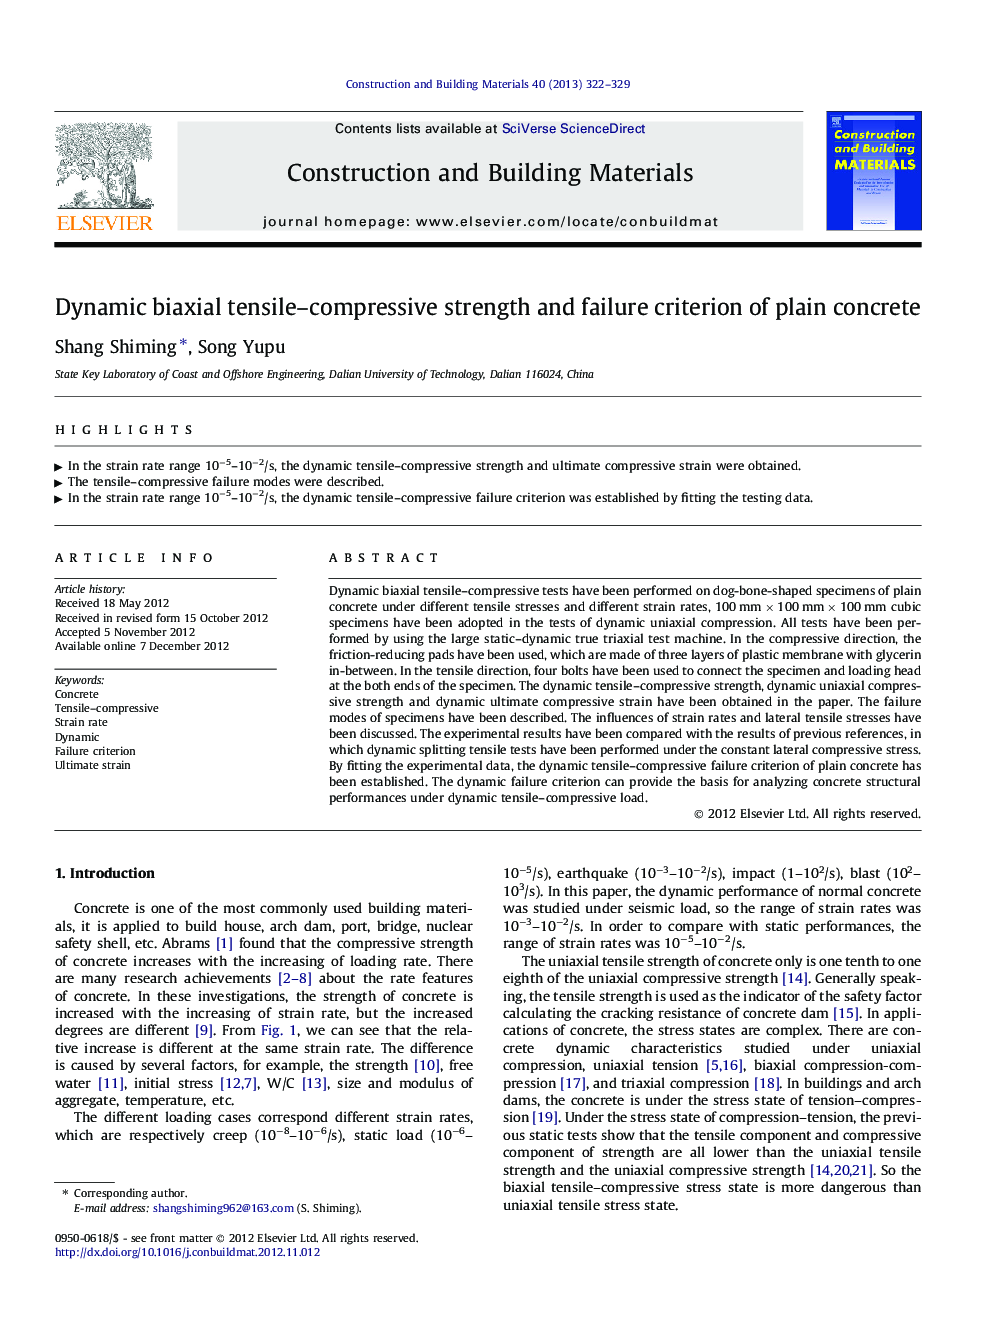 Dynamic biaxial tensile–compressive strength and failure criterion of plain concrete